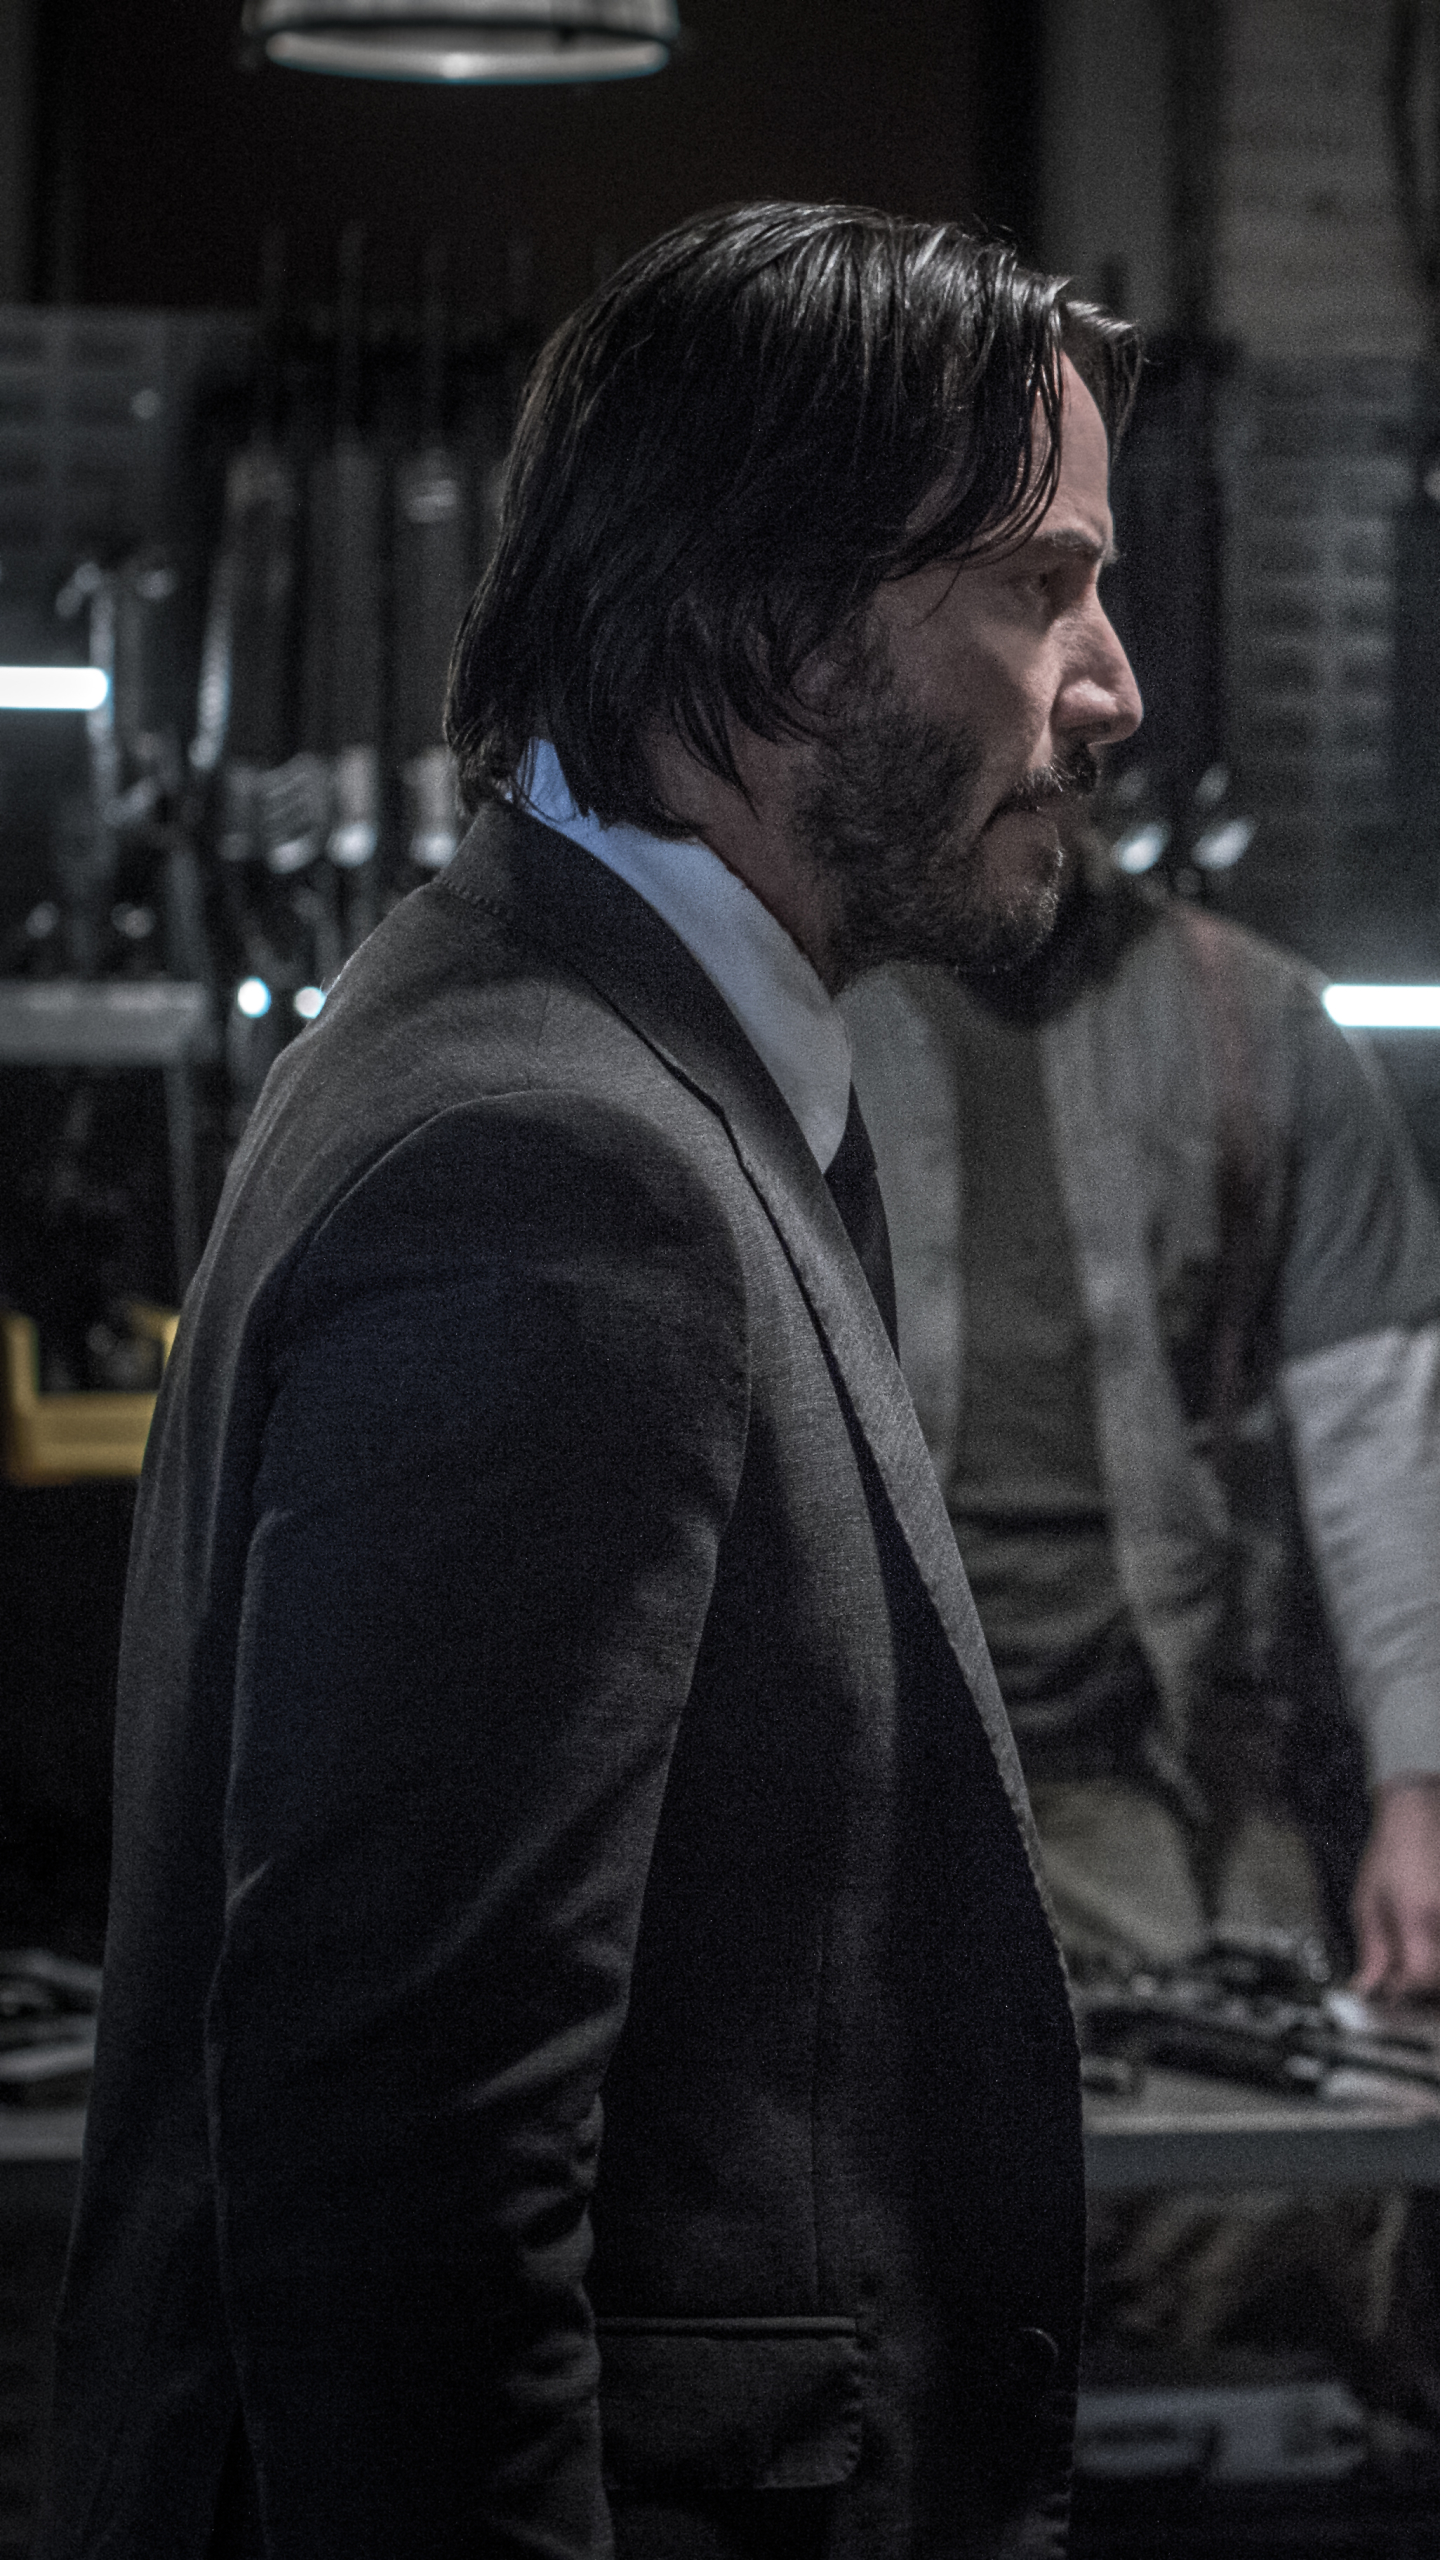  John Wick: Chapter 2 Cellphone FHD pic